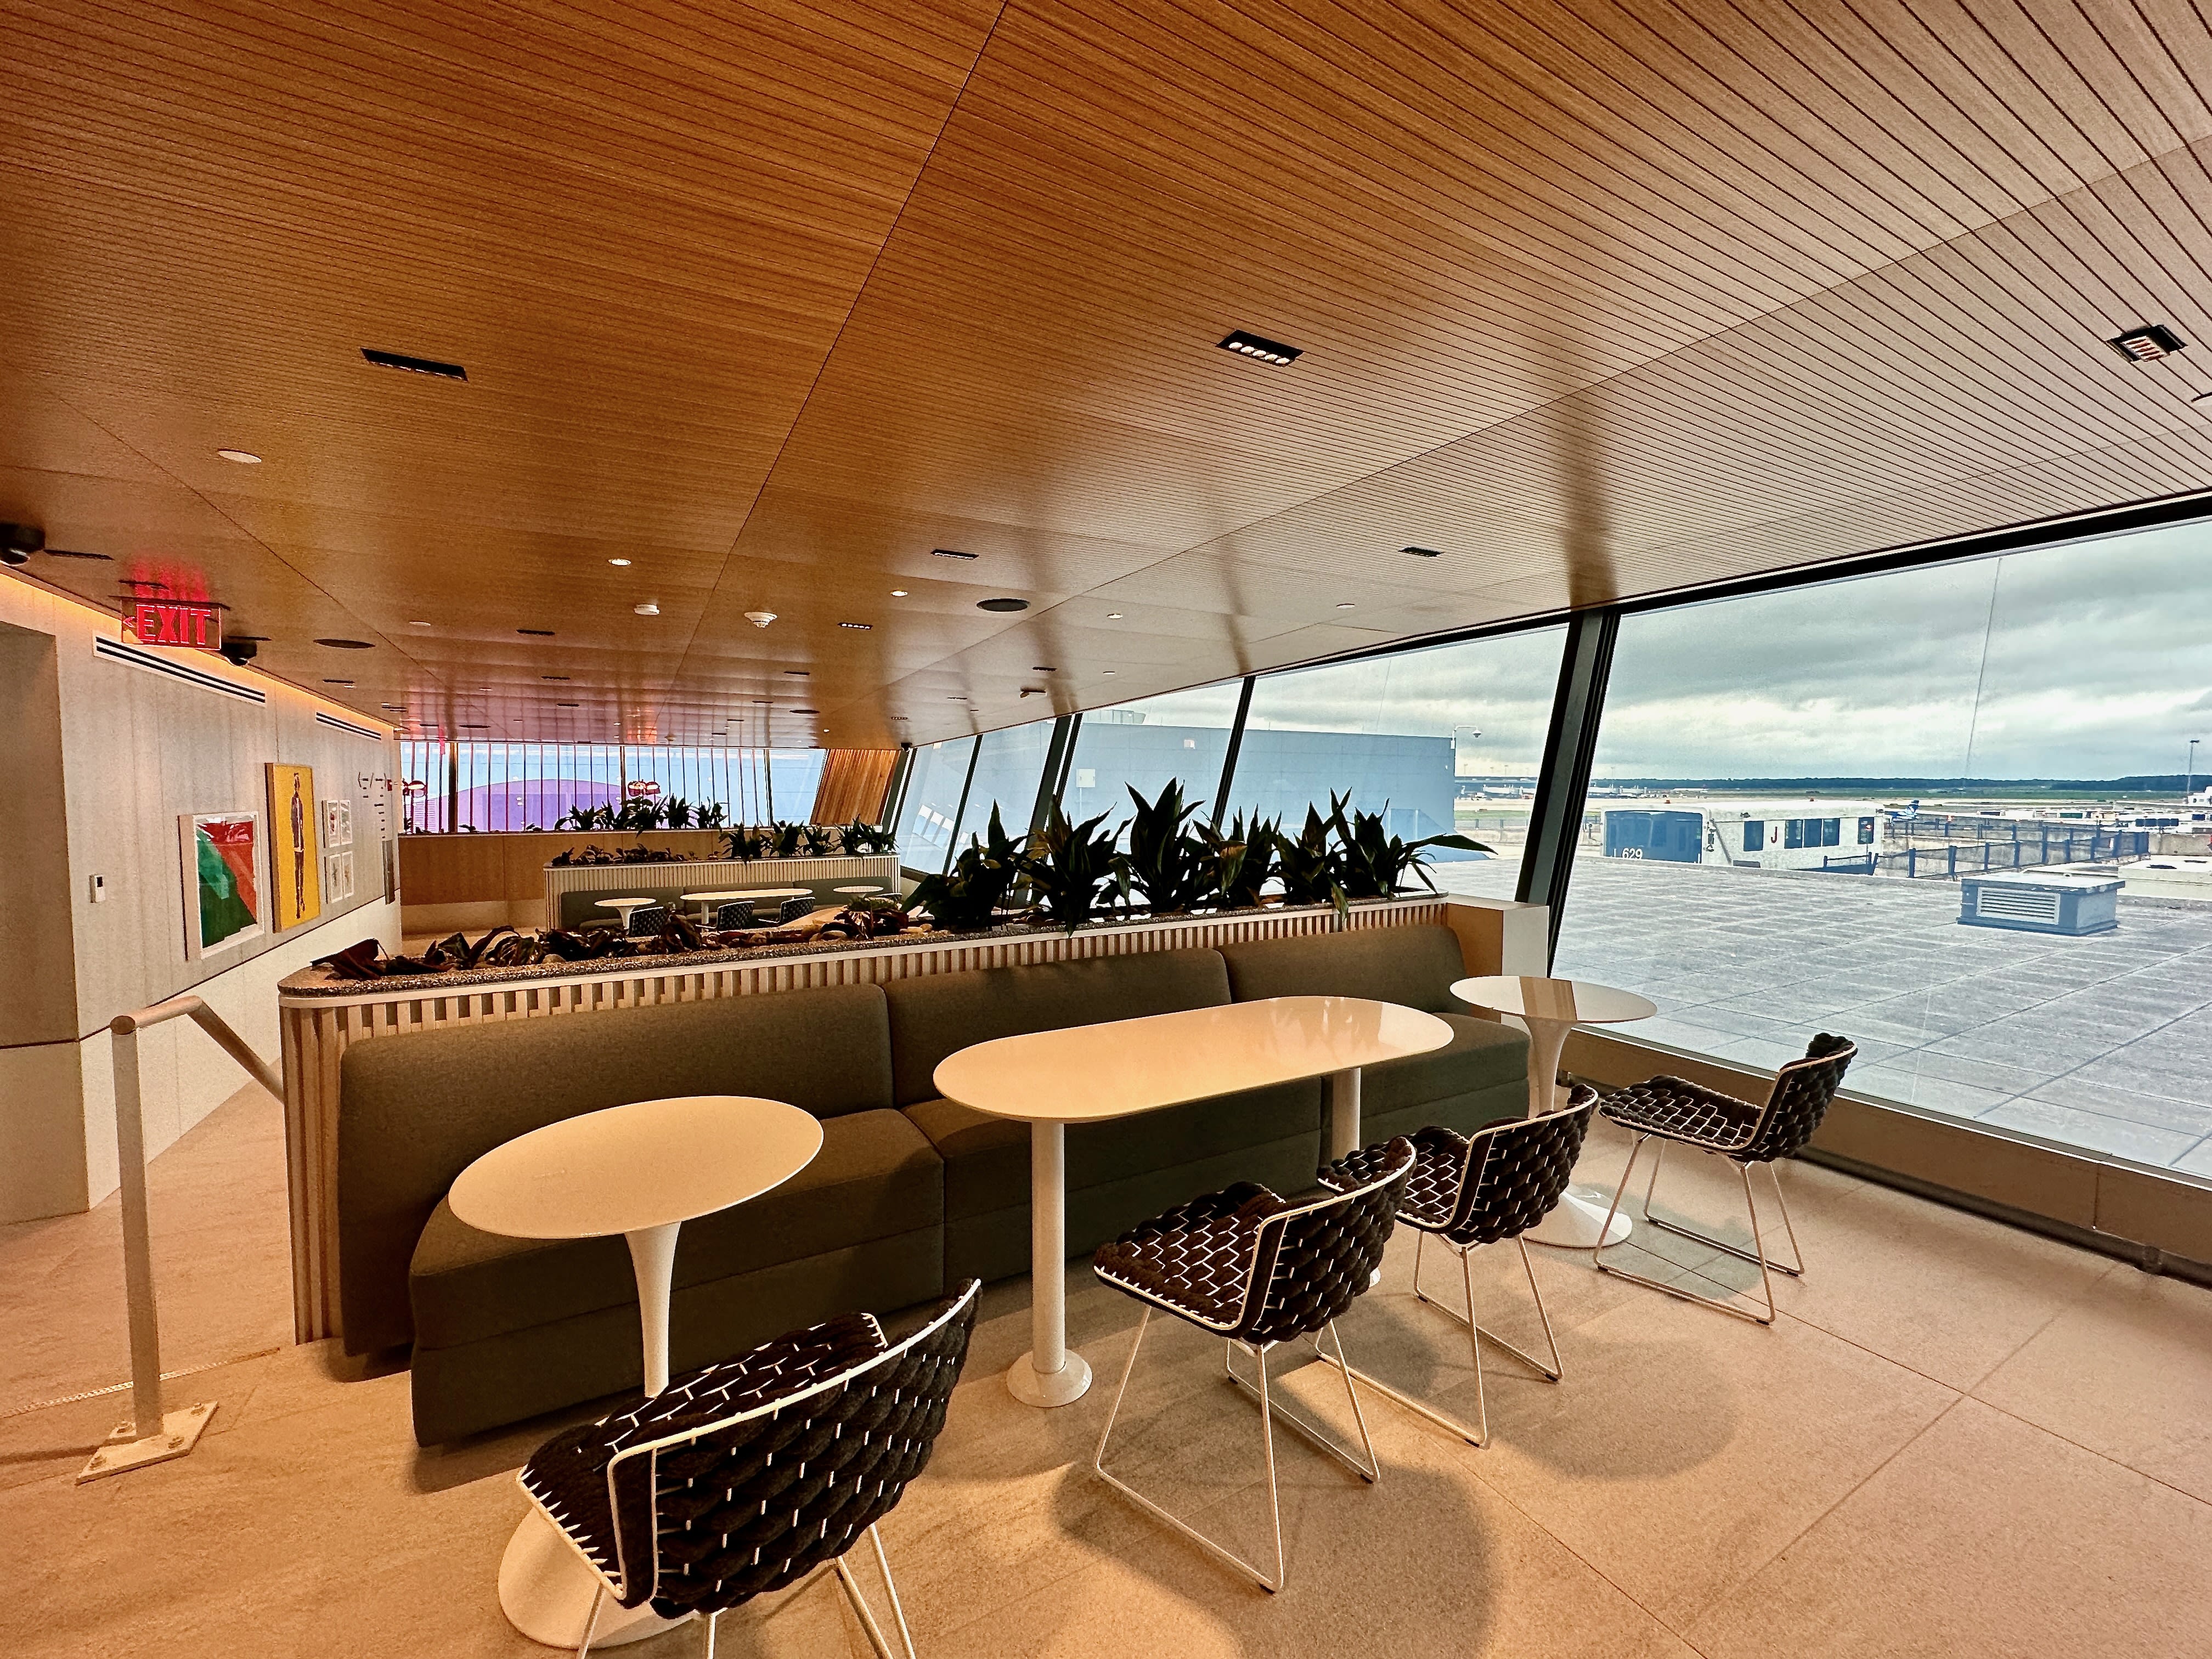 First look at Capital One airport lounge opening in Washing Dulles  international airport